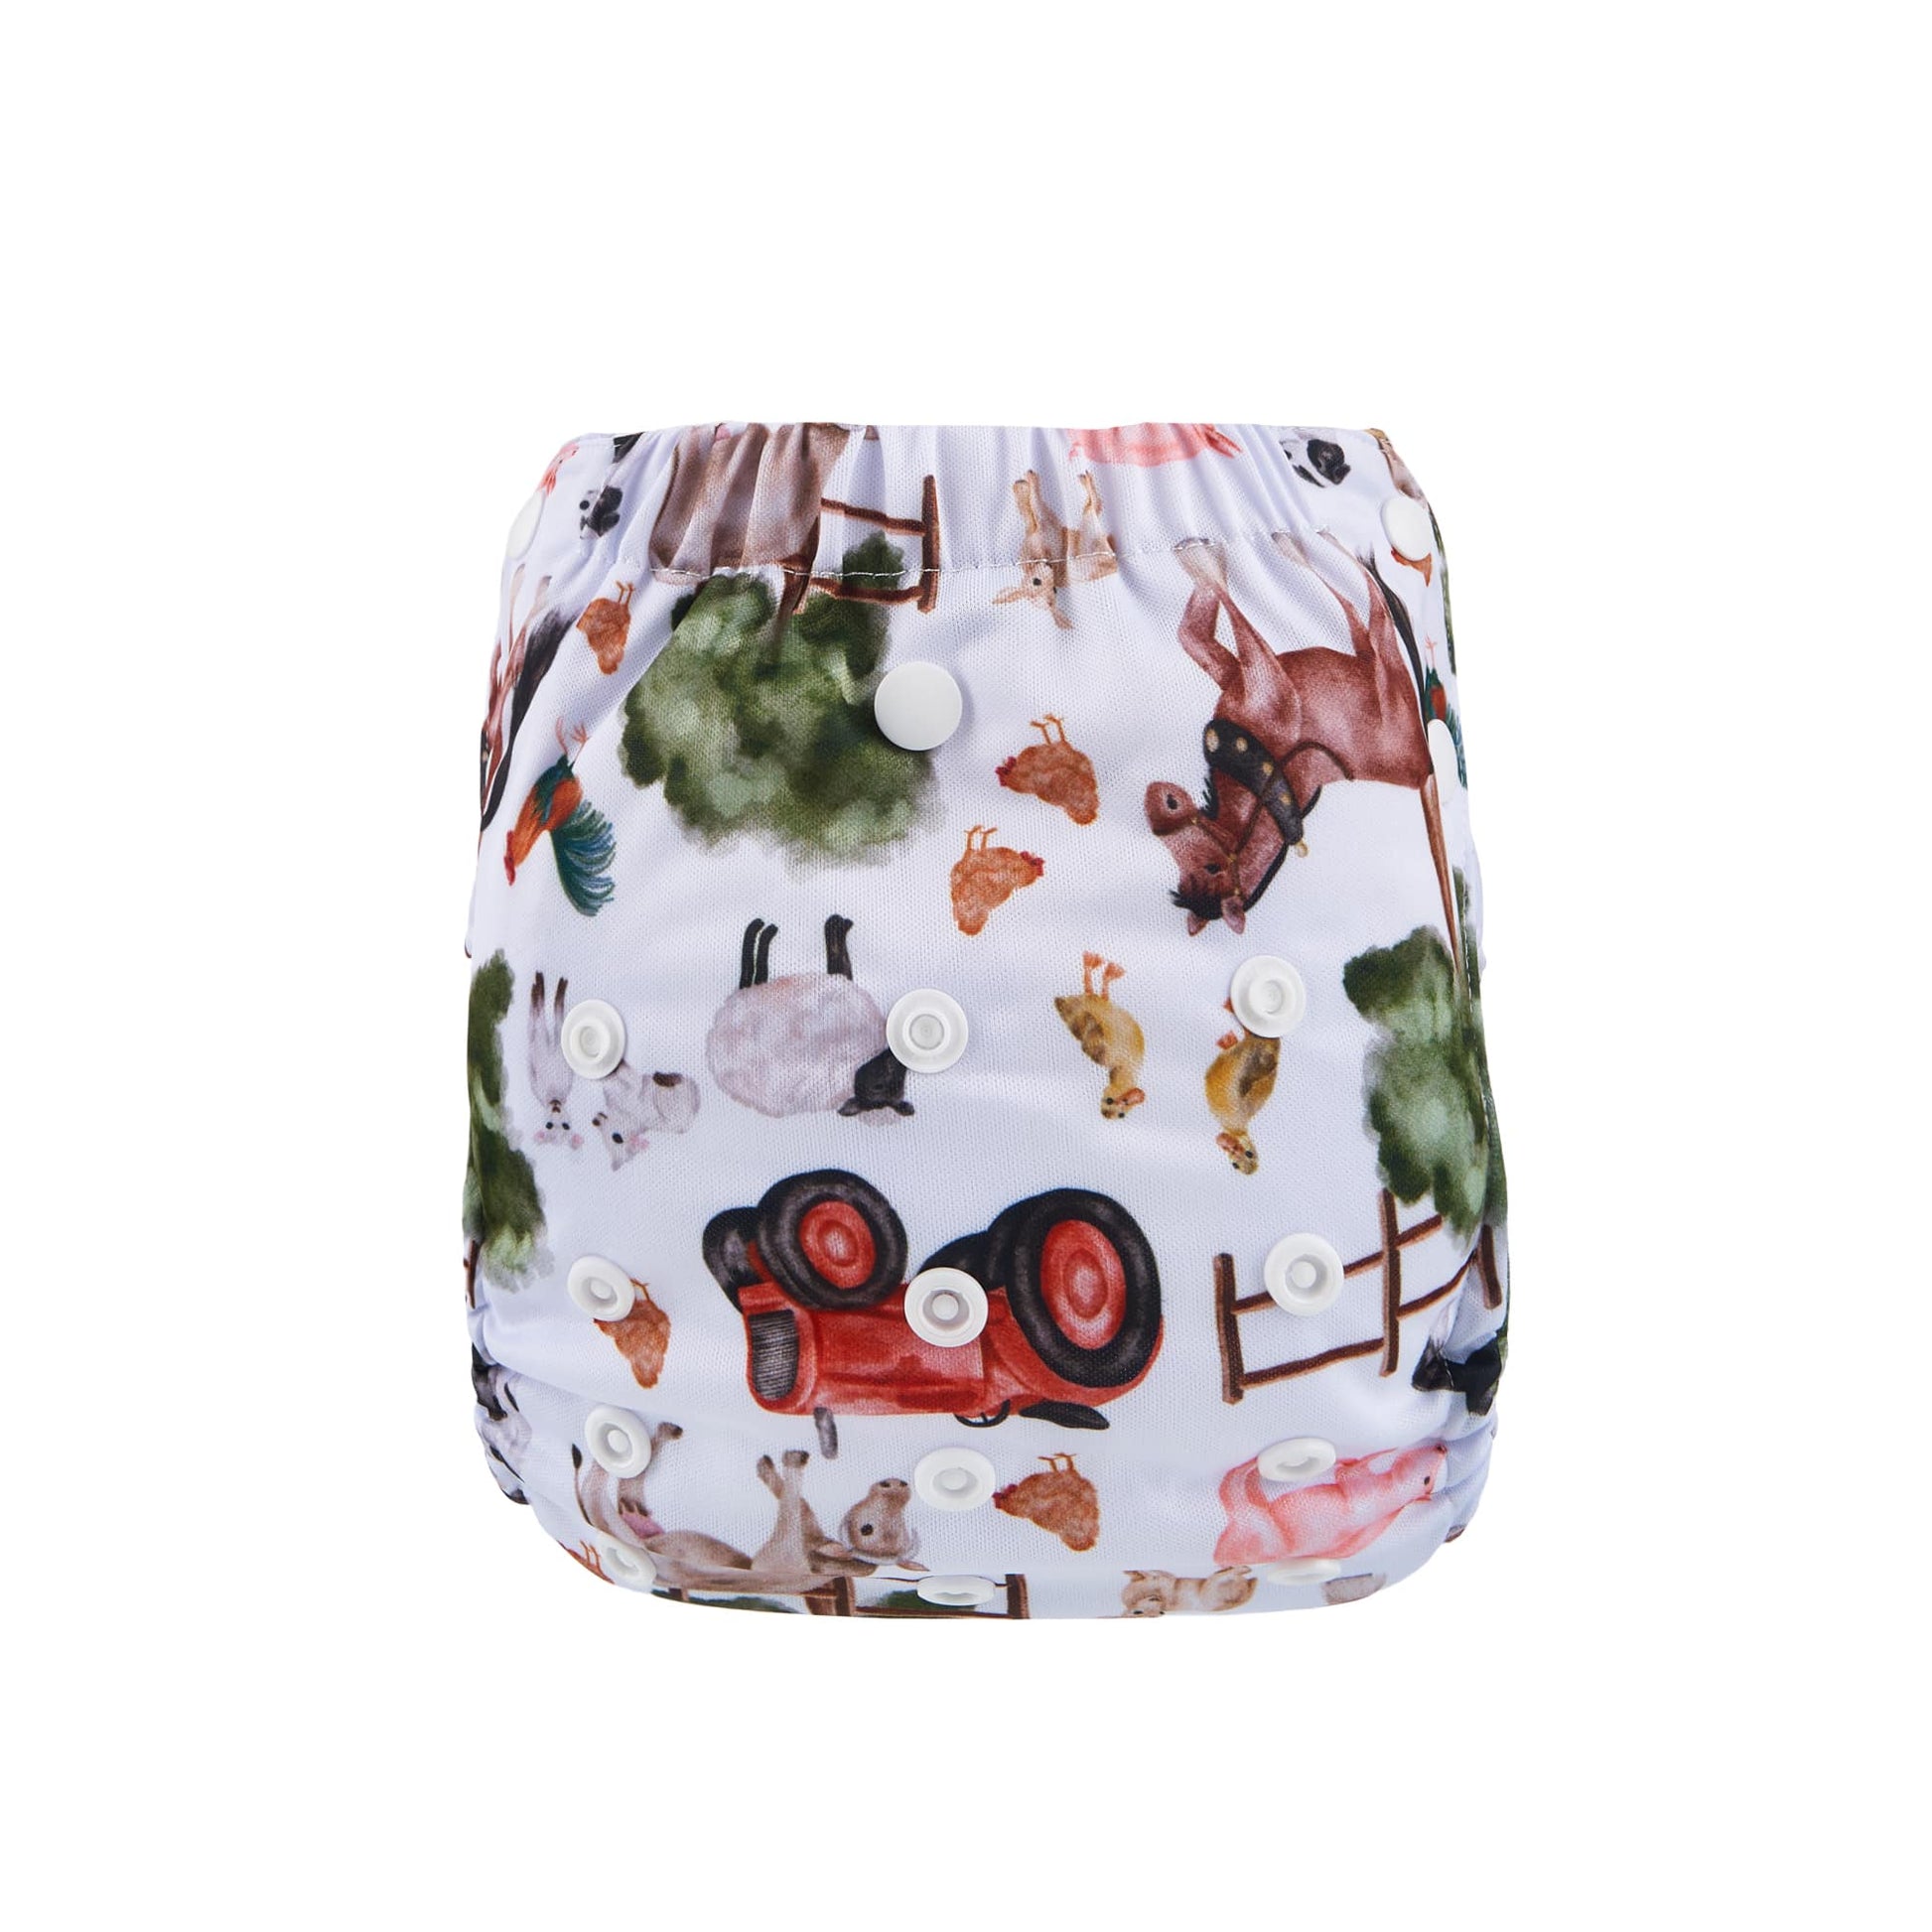 Reusable cloth nappy pull up with a farm print.